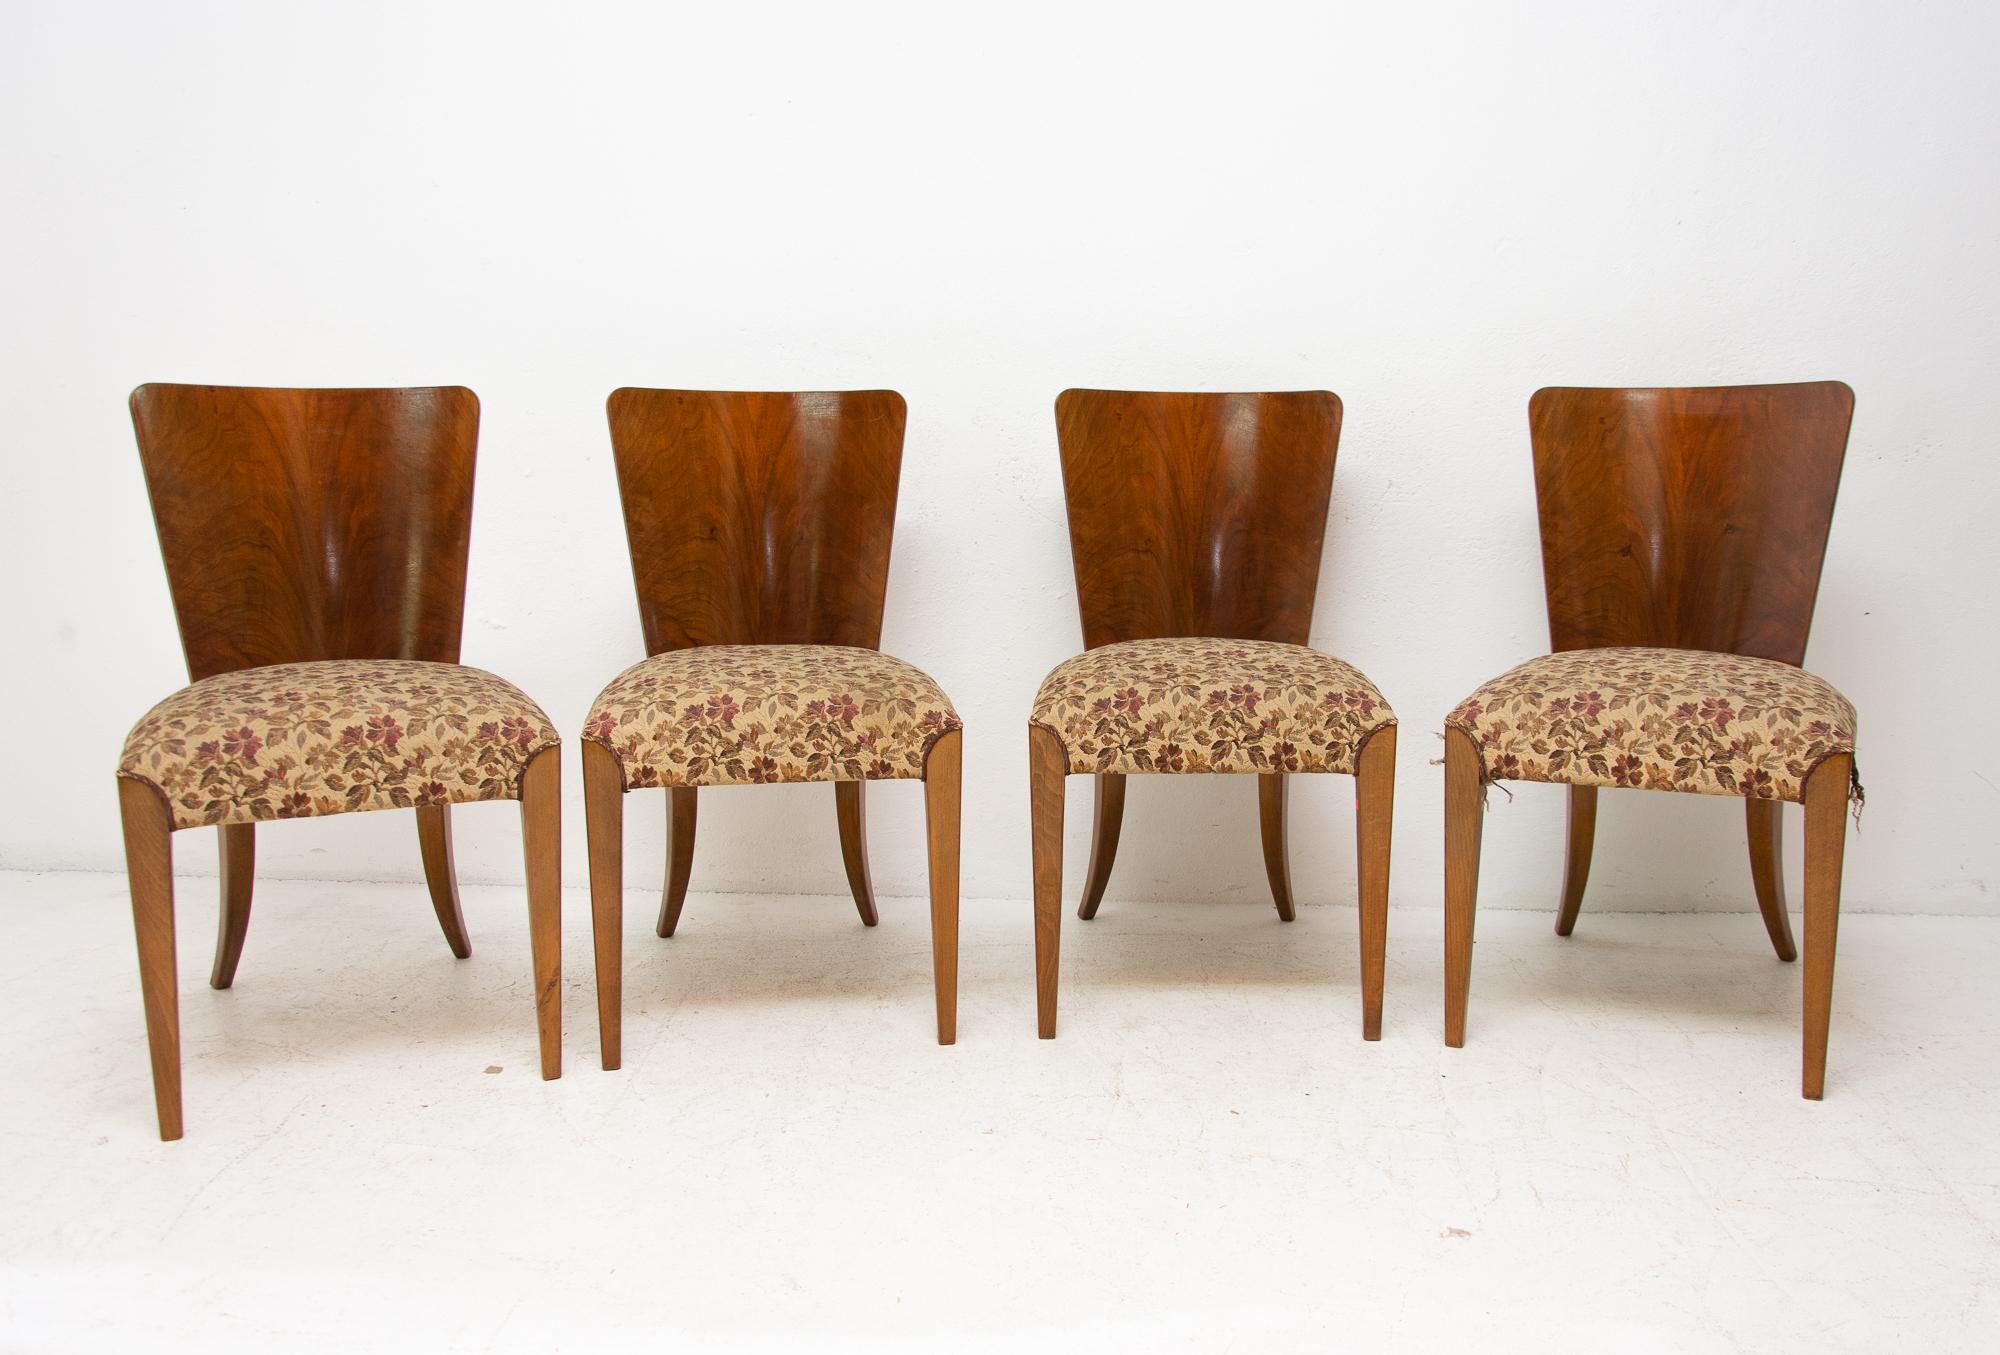 Dining chairs, catalog number H-214, designed by Jindrich Halabala in the 1930s, manufactured in ÚP Závody in the 1950s. It features walnut veneer and original upholstery. The chairs are in very good vintage condition. Price is for the set of 6.